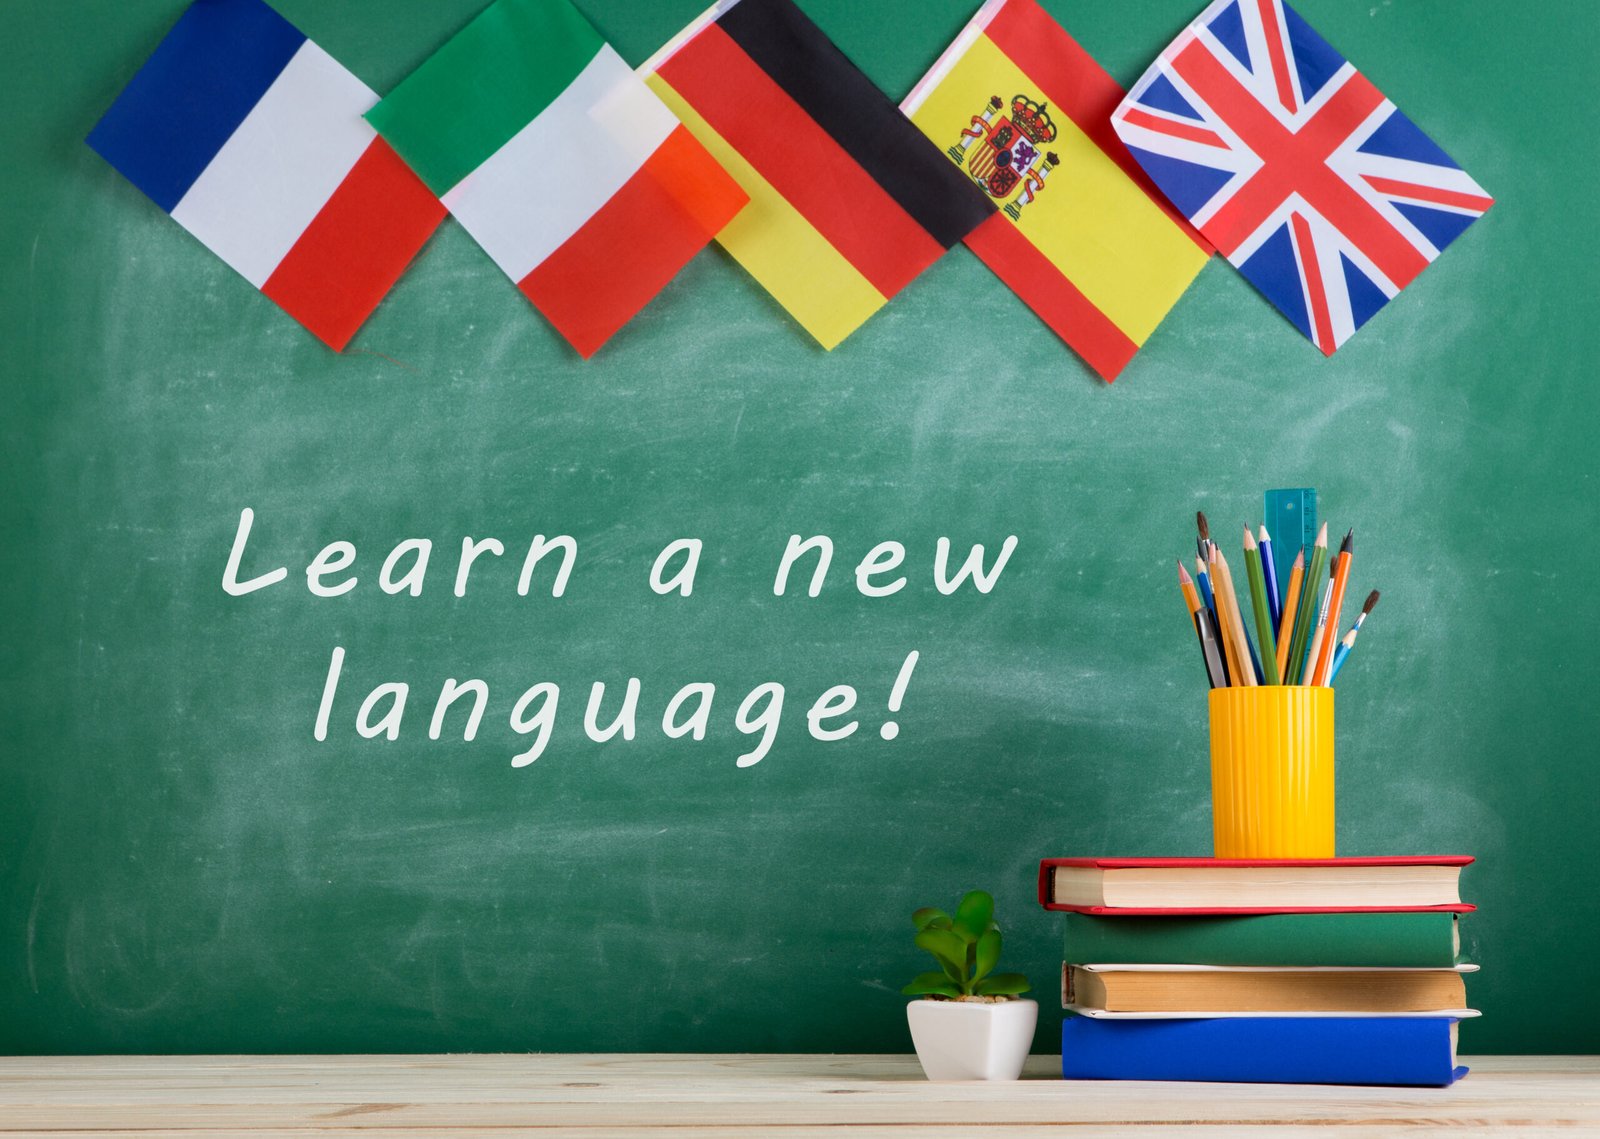 "How to Learn a New Language Quickly and Effectively